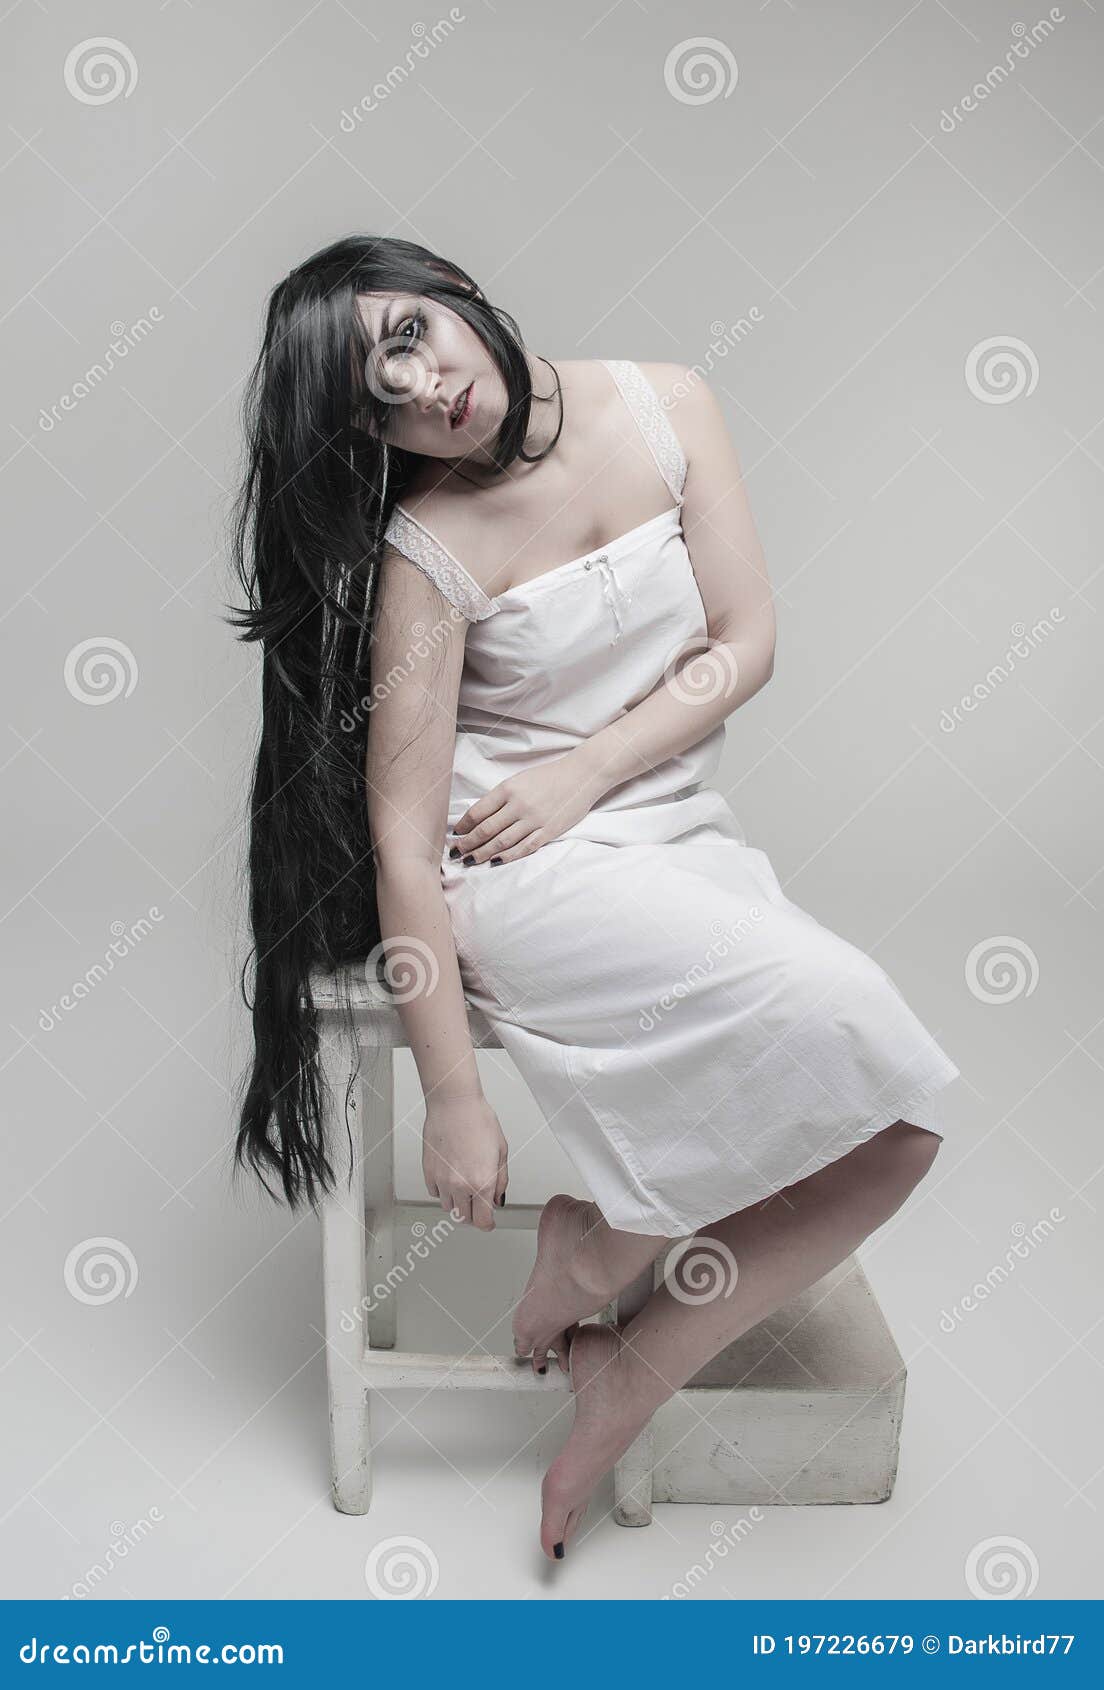 Mystical Ghost Woman with Black Long Hair Sitting on Chair on Gray  Background Stock Image - Image of drama, ghostly: 197226679